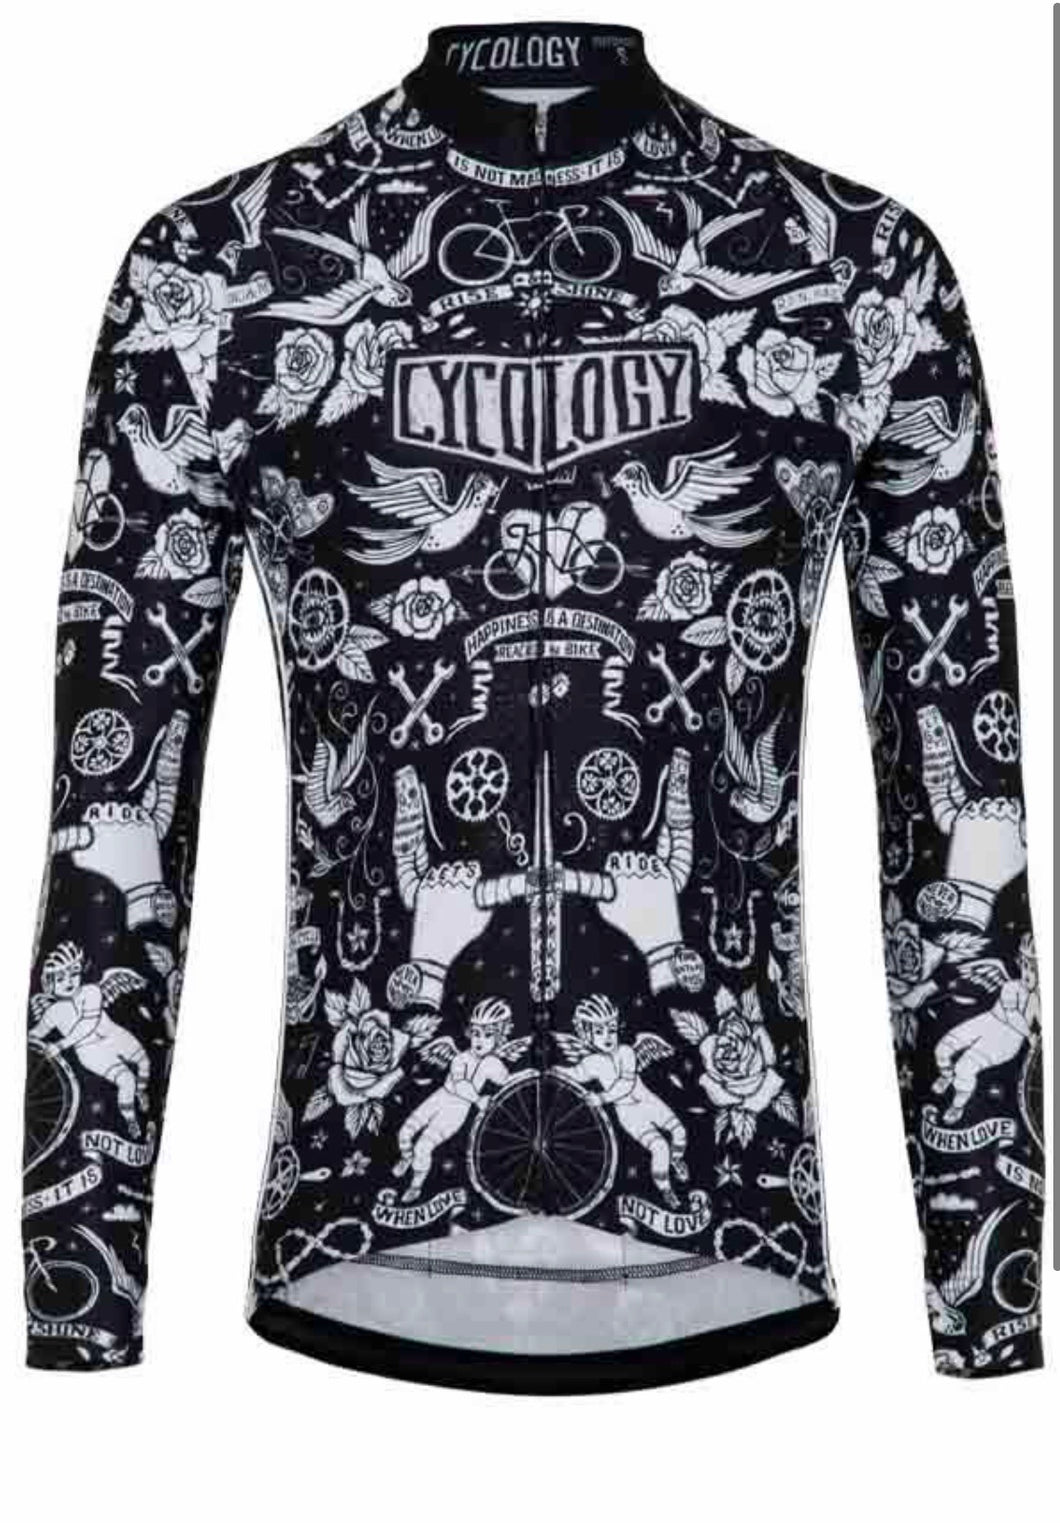 Cycology Quality Men's Long-Sleeved Jersey - Design Tattoo